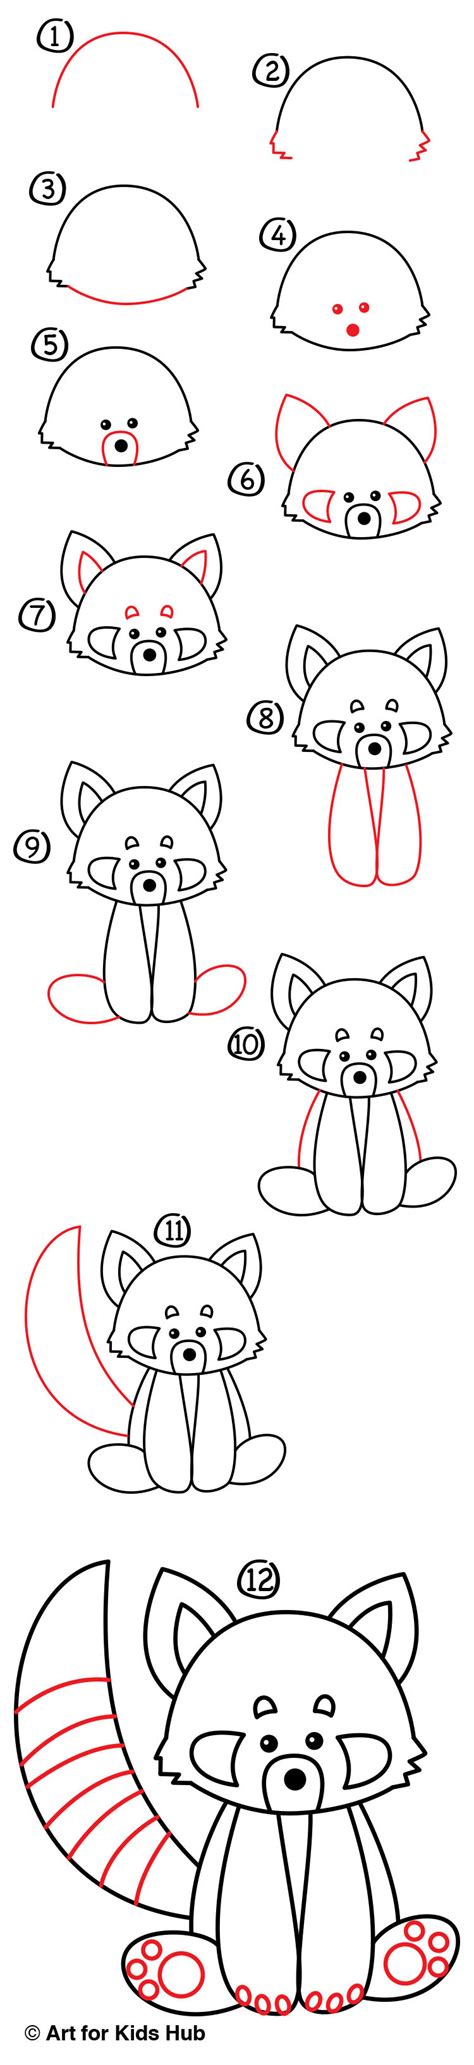 Https://techalive.net/draw/easy How To Draw A Red Panda